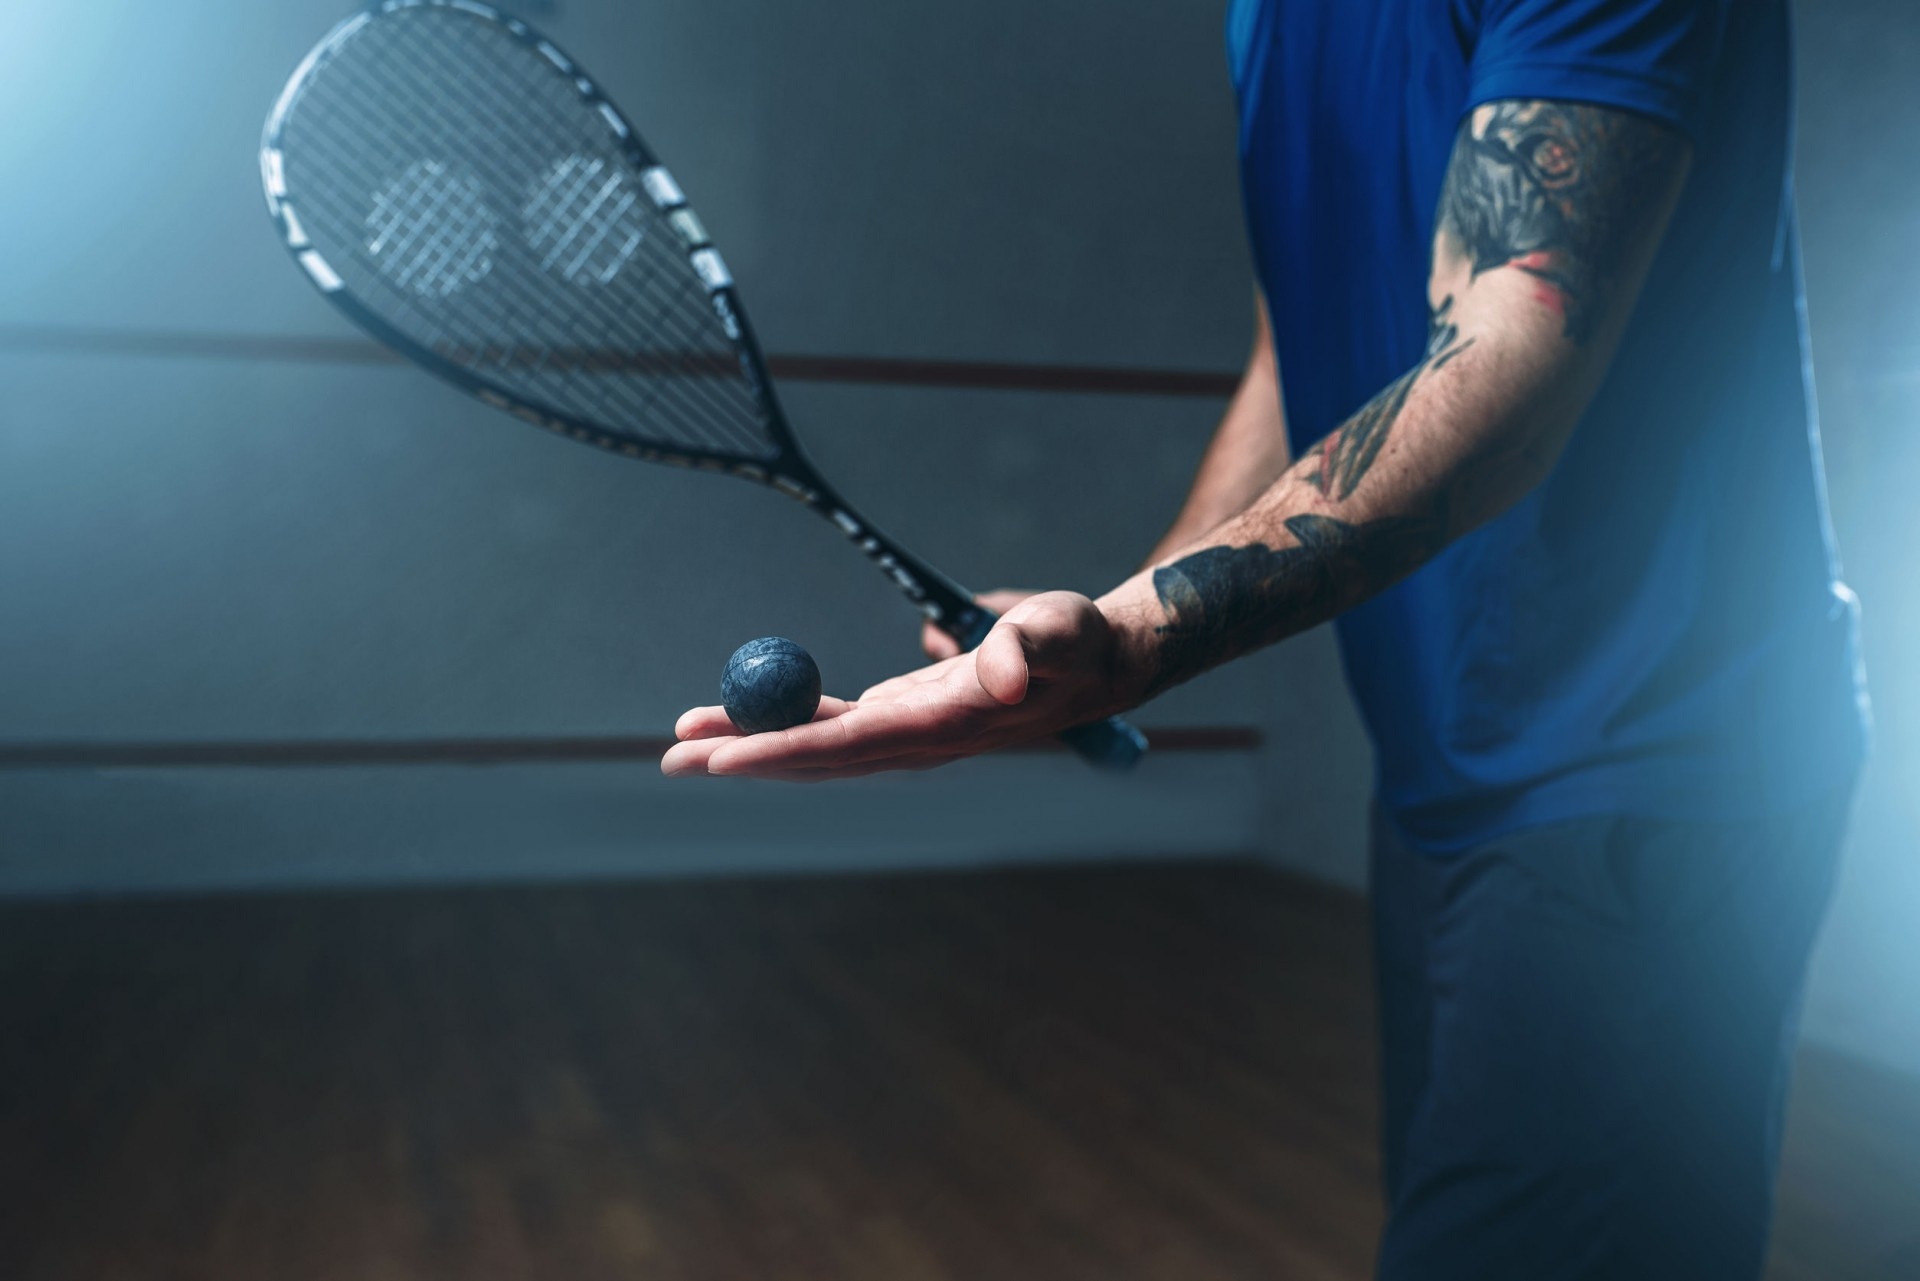 Squash (Sport): A game played with a long-handled strung racket and a small rubber ball, Tennis player. 1920x1290 HD Wallpaper.